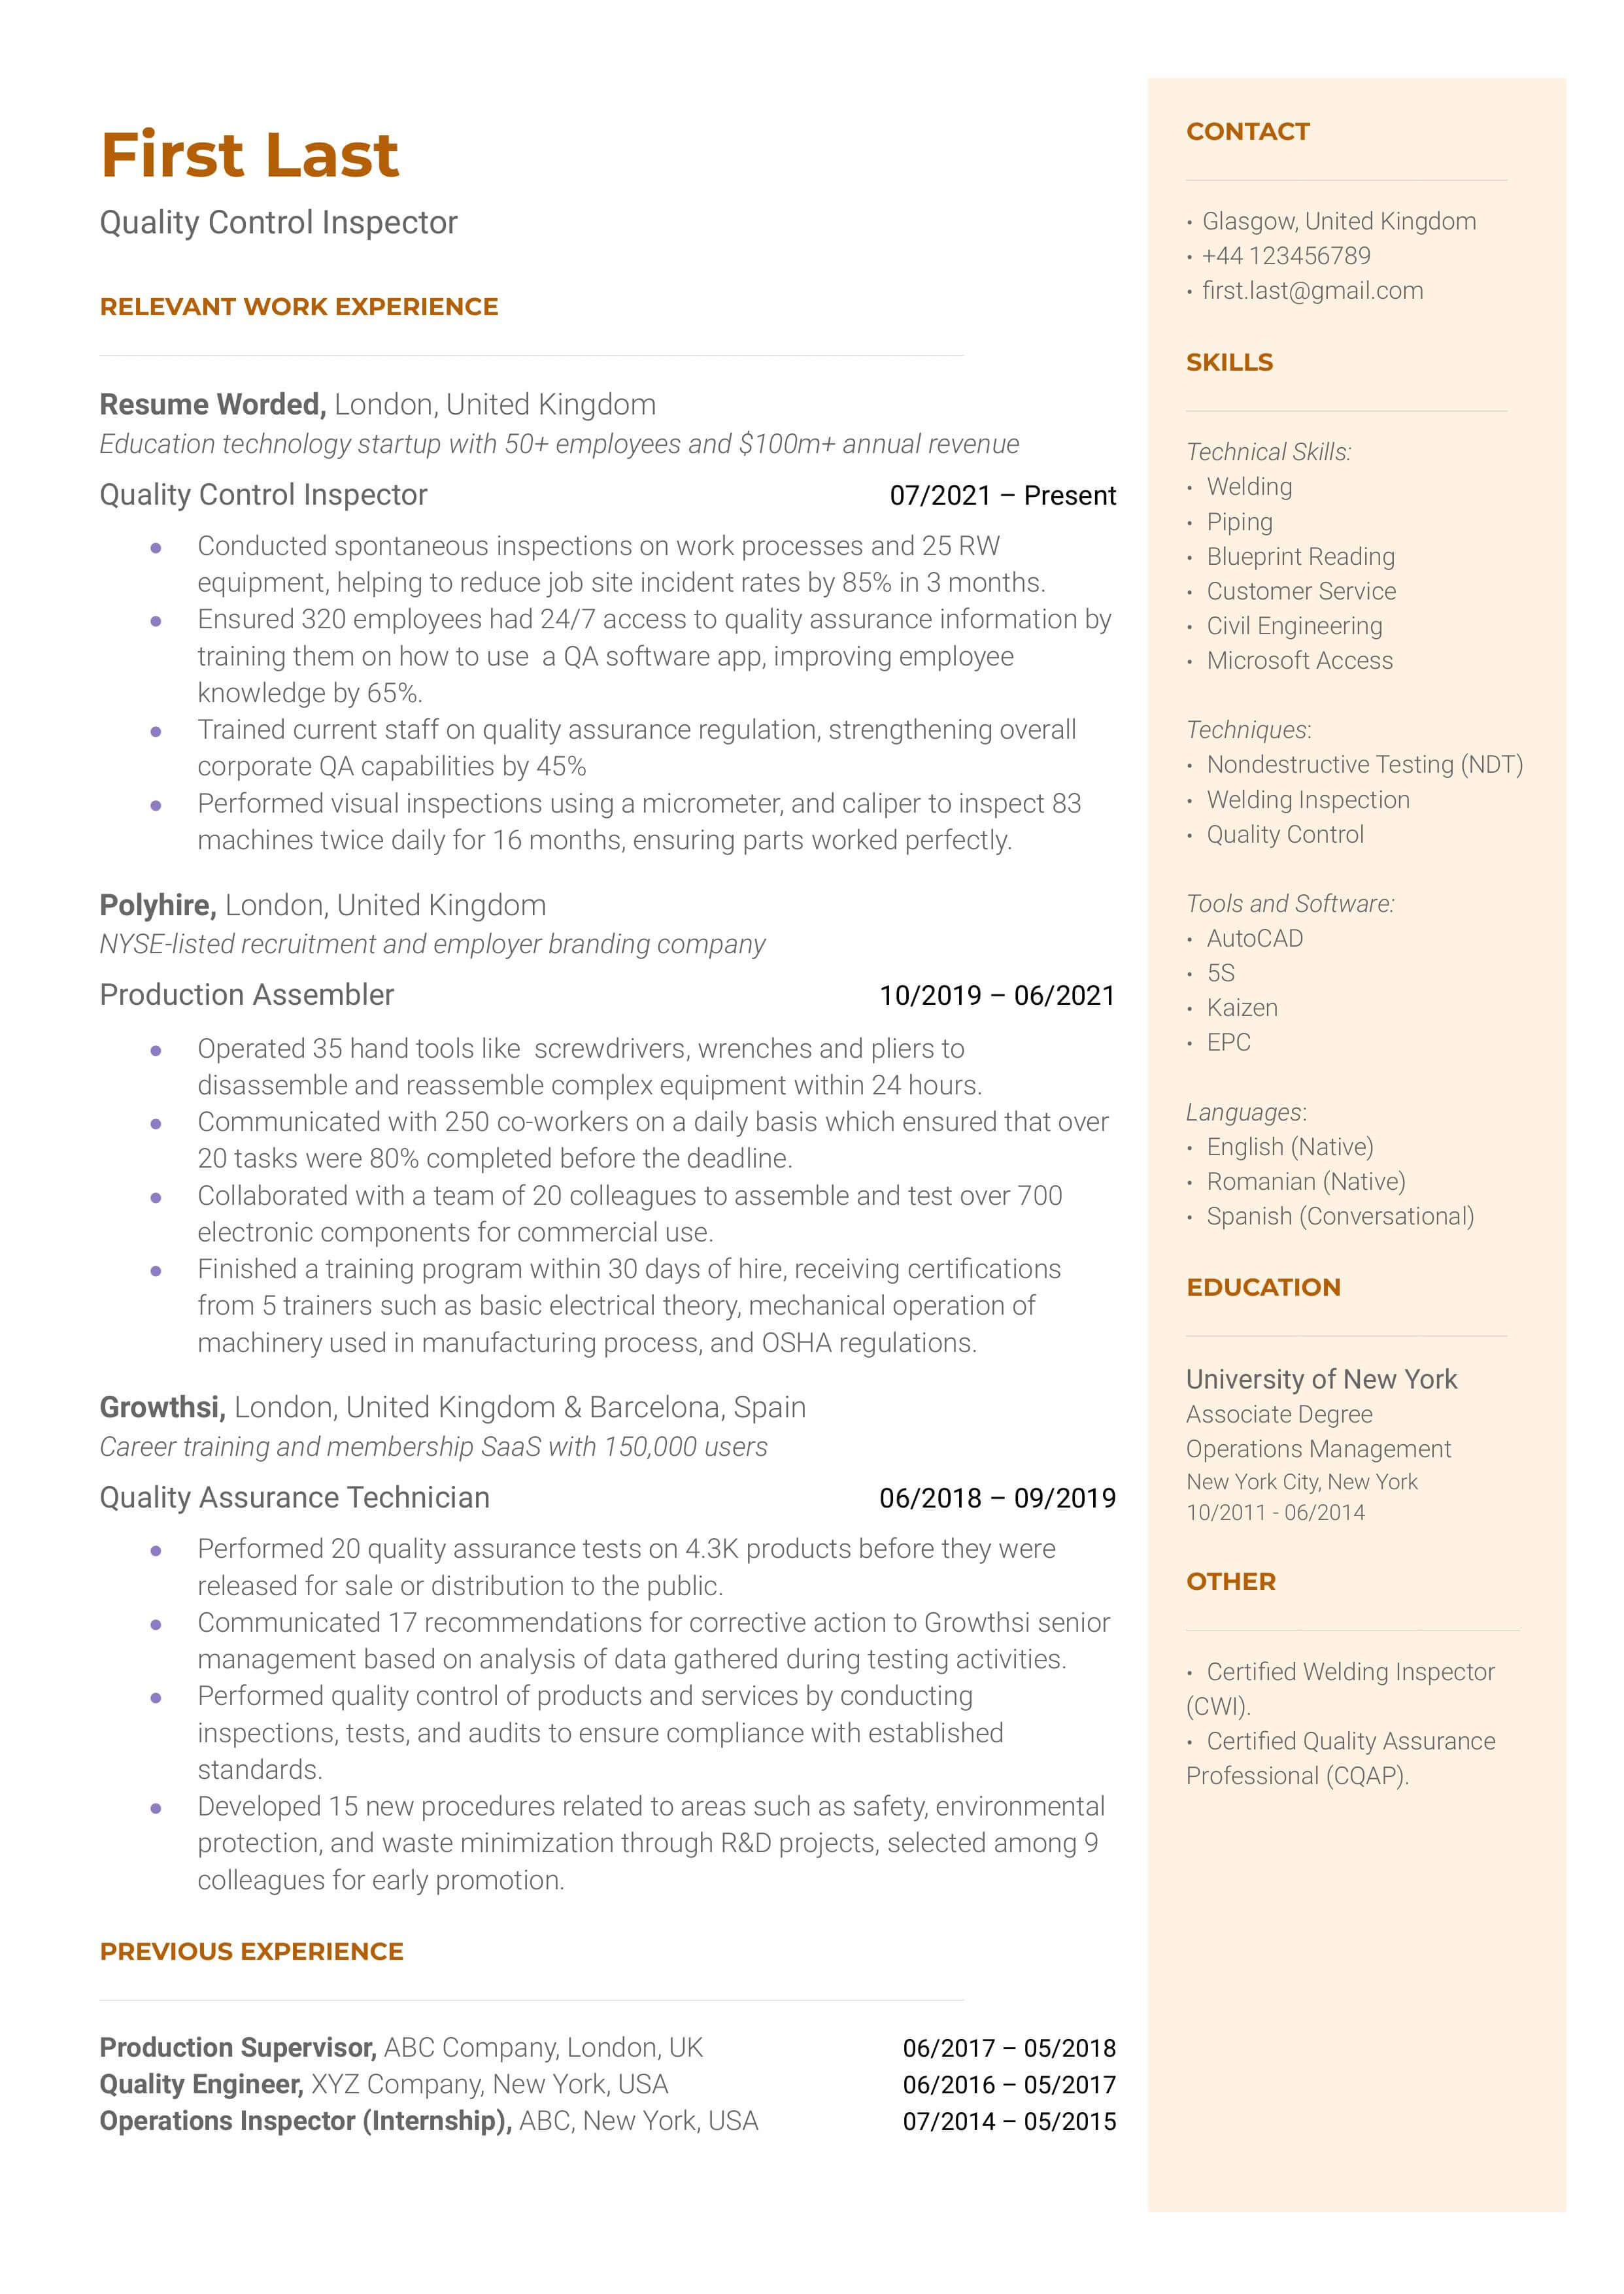 Quality Control Inspector Resume Sample